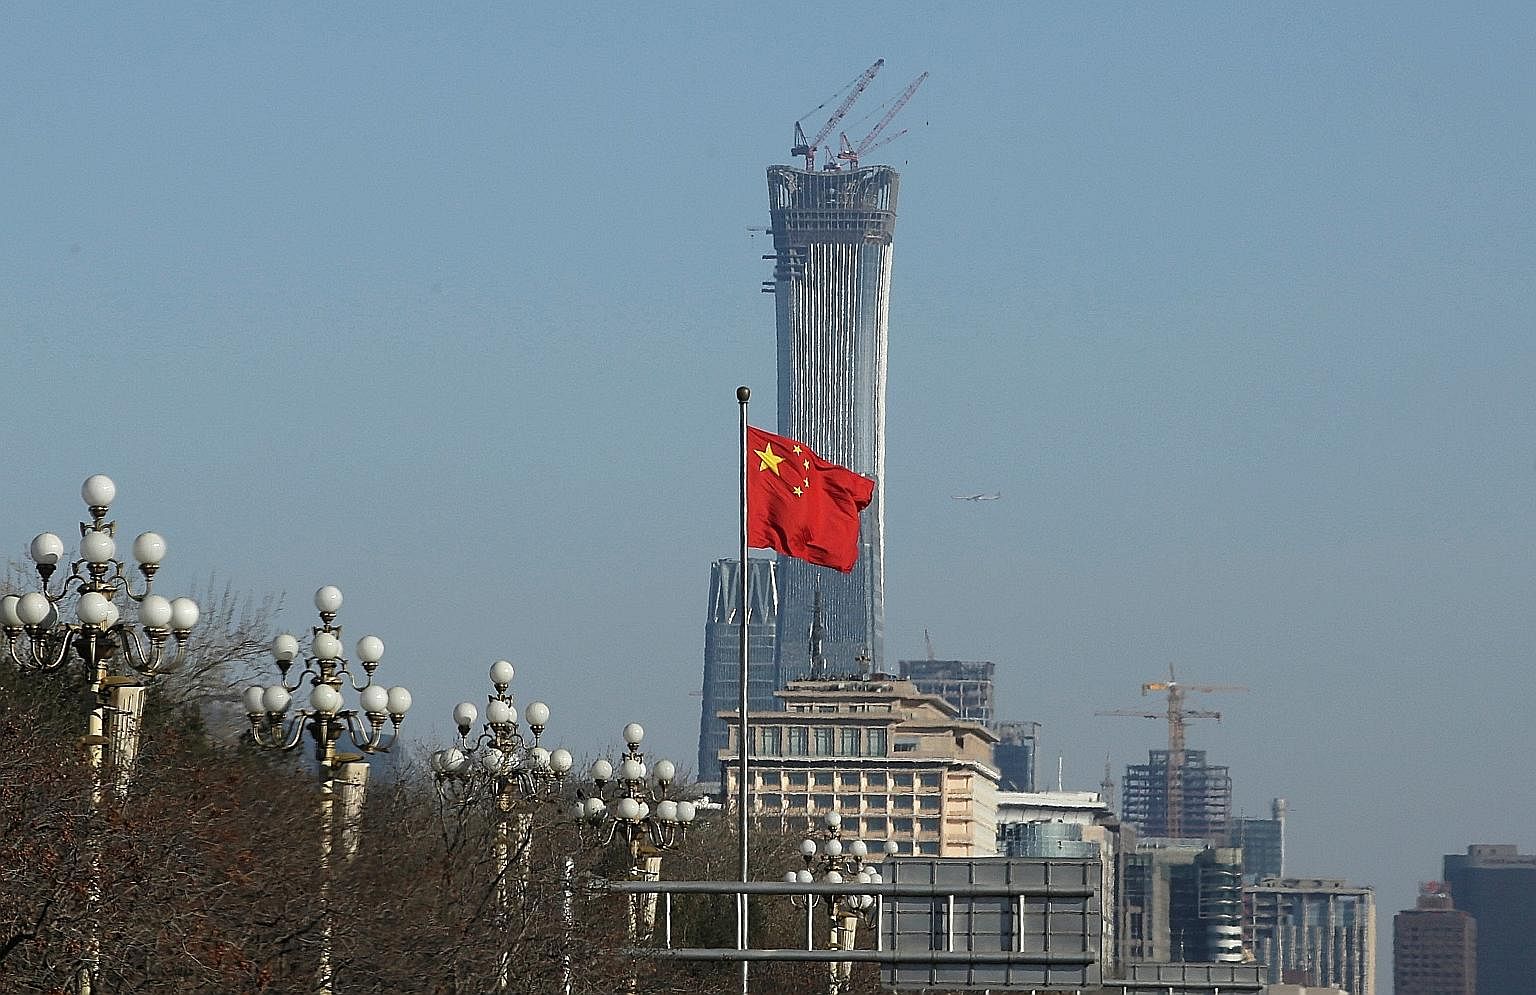 This year is the 40th anniversary of China opening its markets and experimenting with capitalist reforms. How the CCP tells the story of the country's development will be critical.